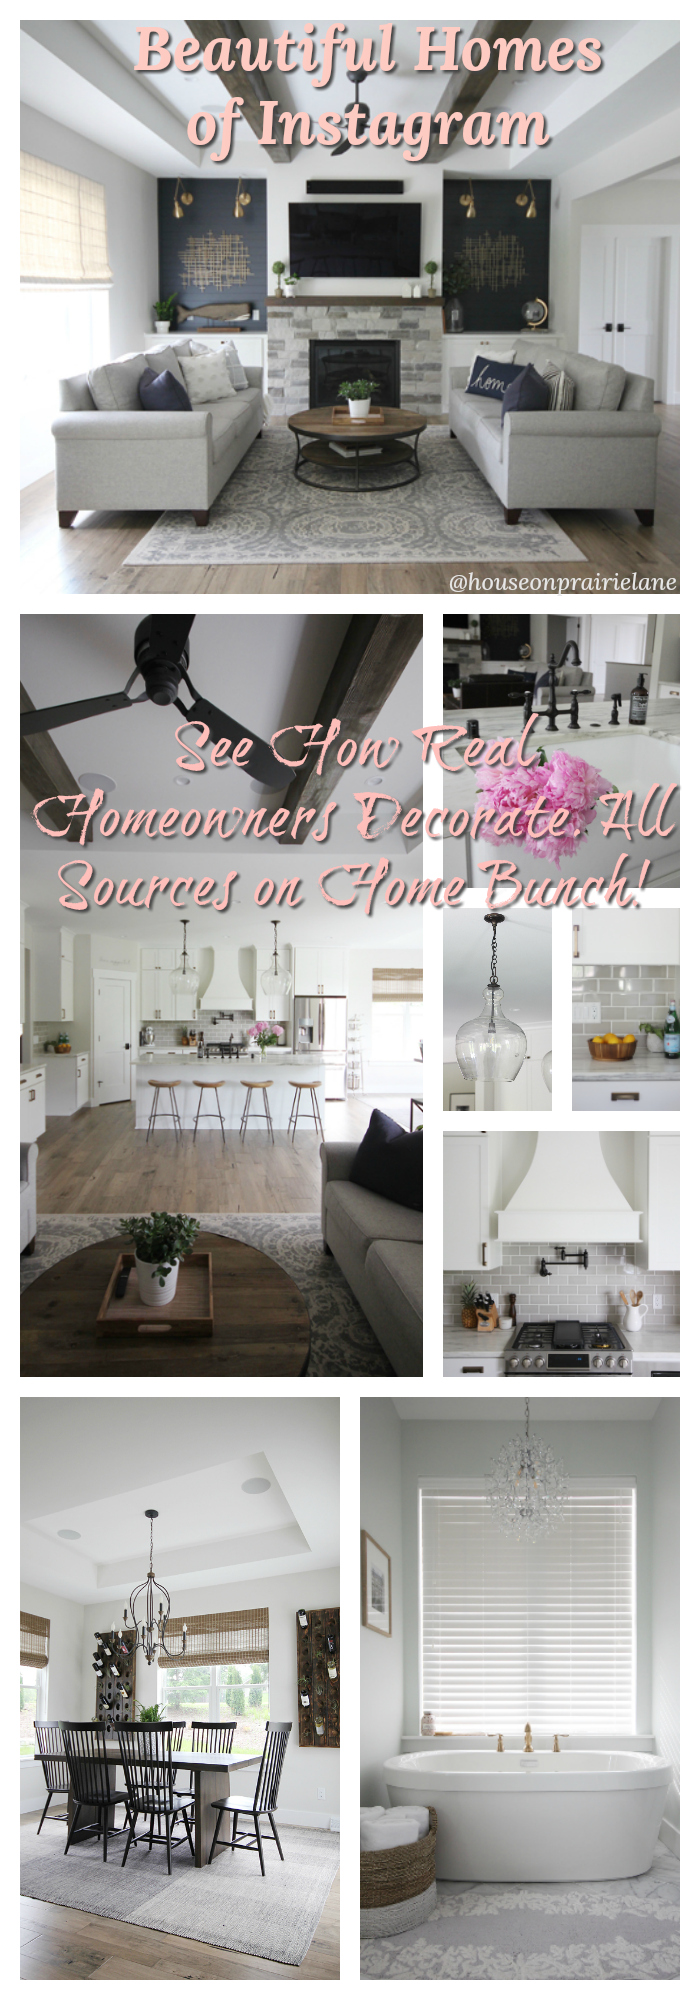 Beautiful Homes of Instagram See How Real Homeowners Decorate All Sources on Home Bunch Beautiful Homes of Instagram Beautiful Homes of Instagram #BeautifulHomes #Instagram